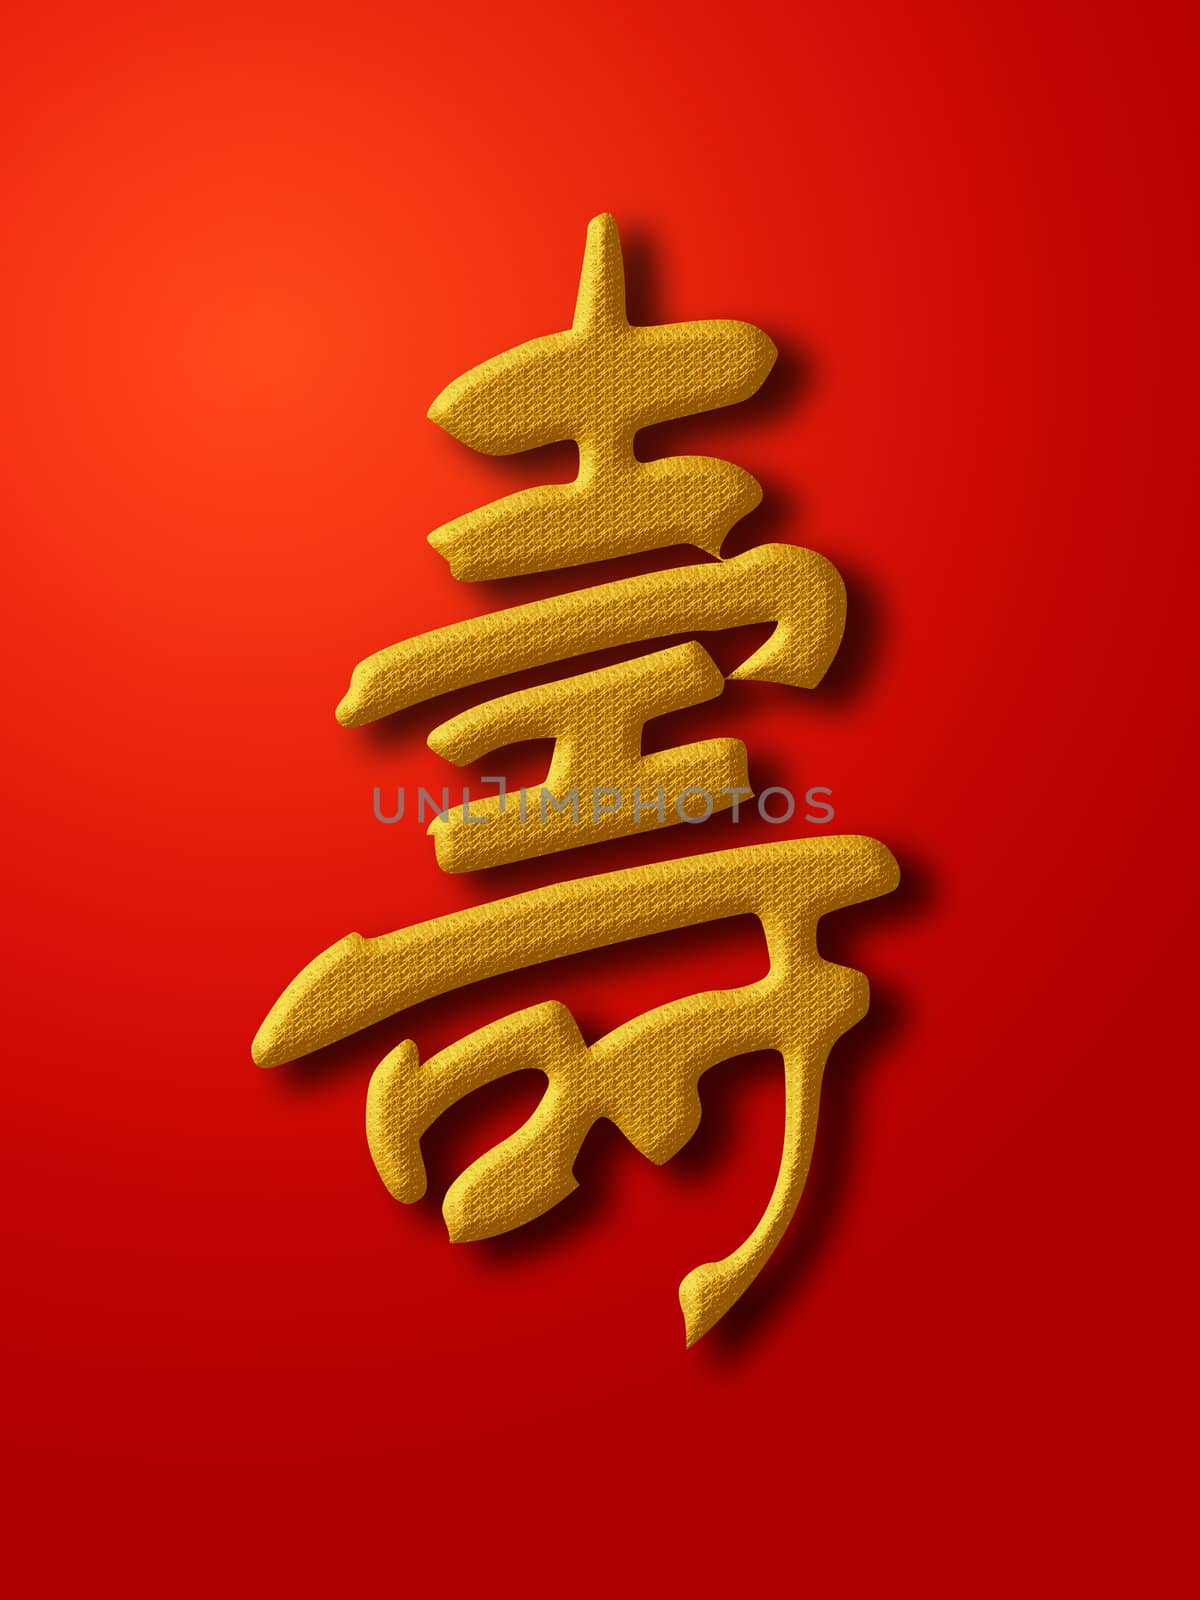 Longevity Chinese Calligraphy Gold on Red Background by Davidgn